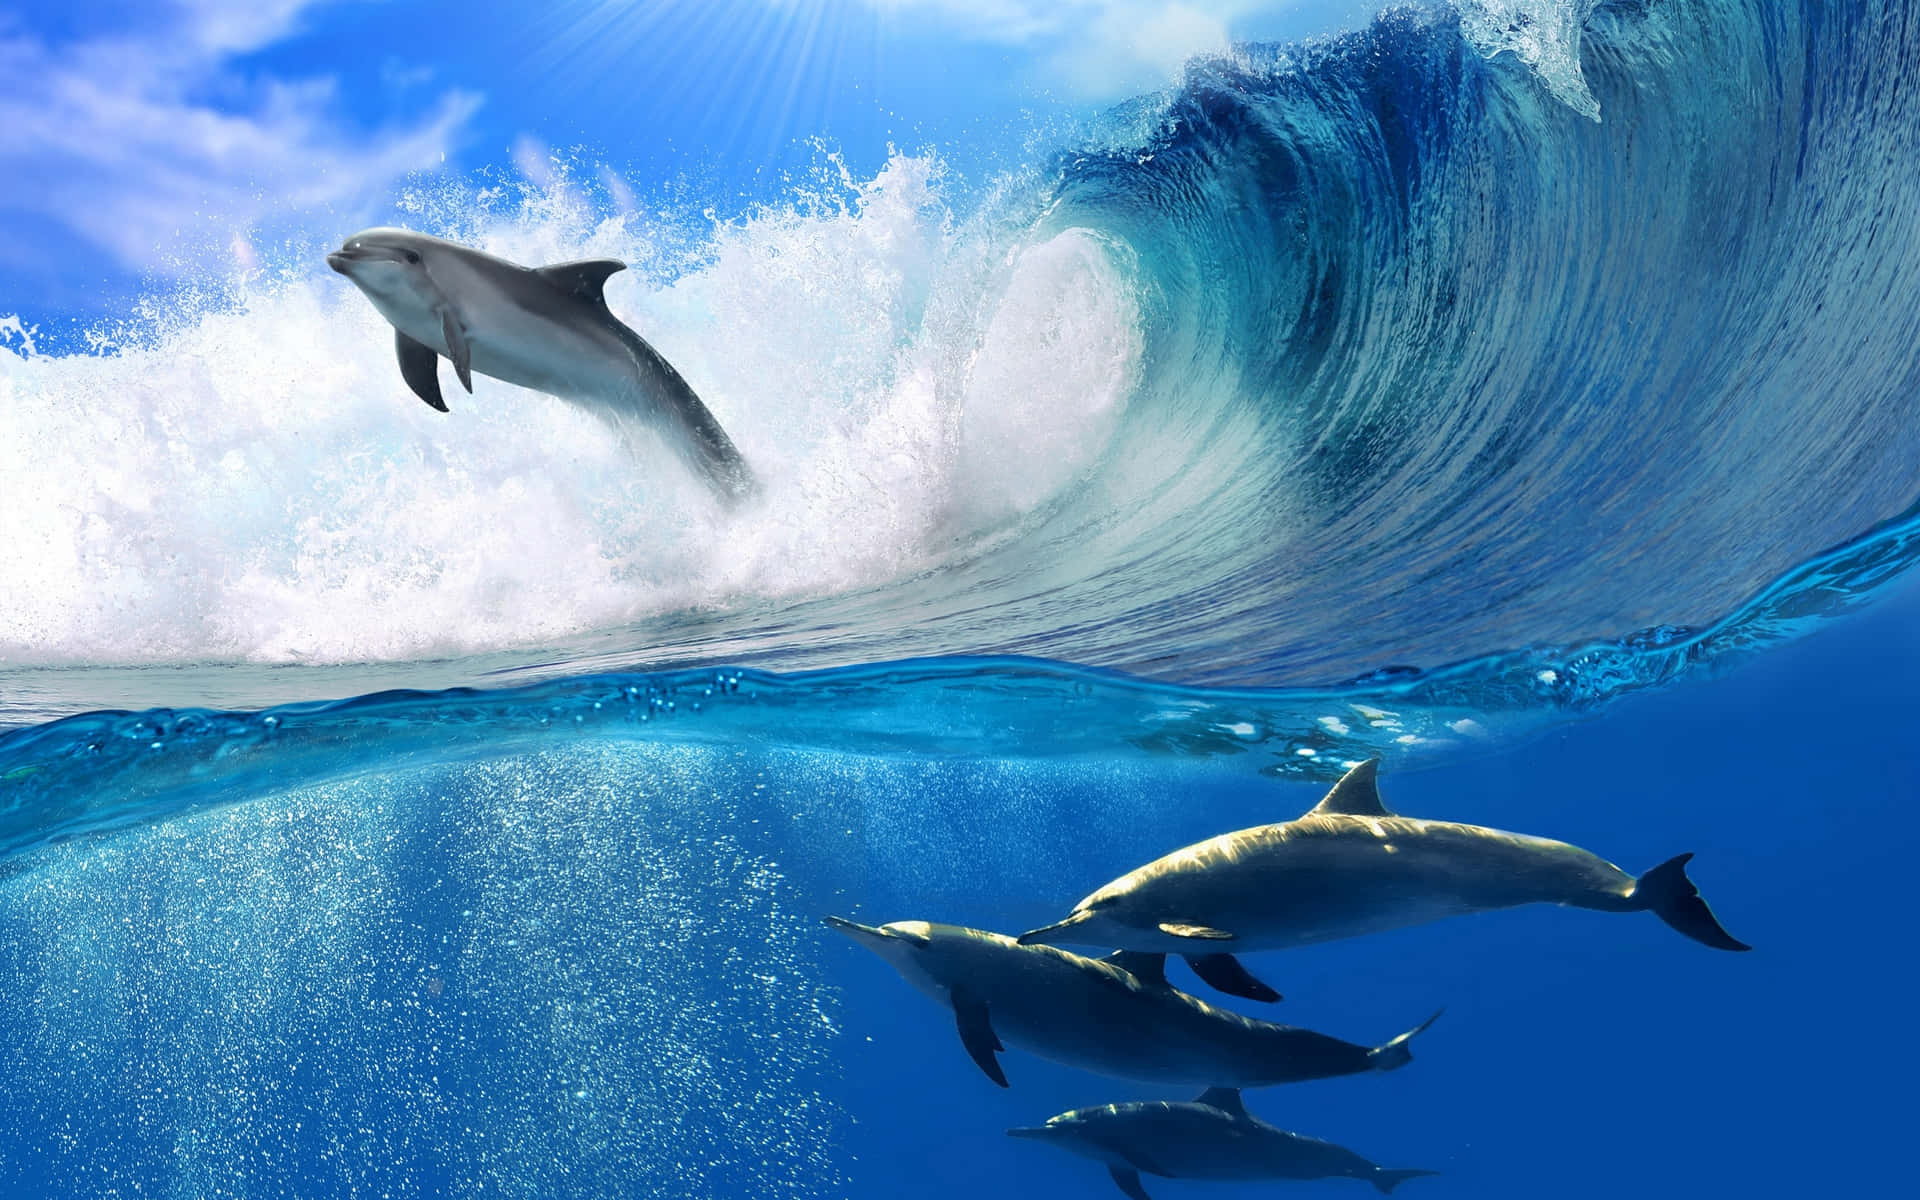 A school of dolphins playfully swim in the crystal clear blue ocean.